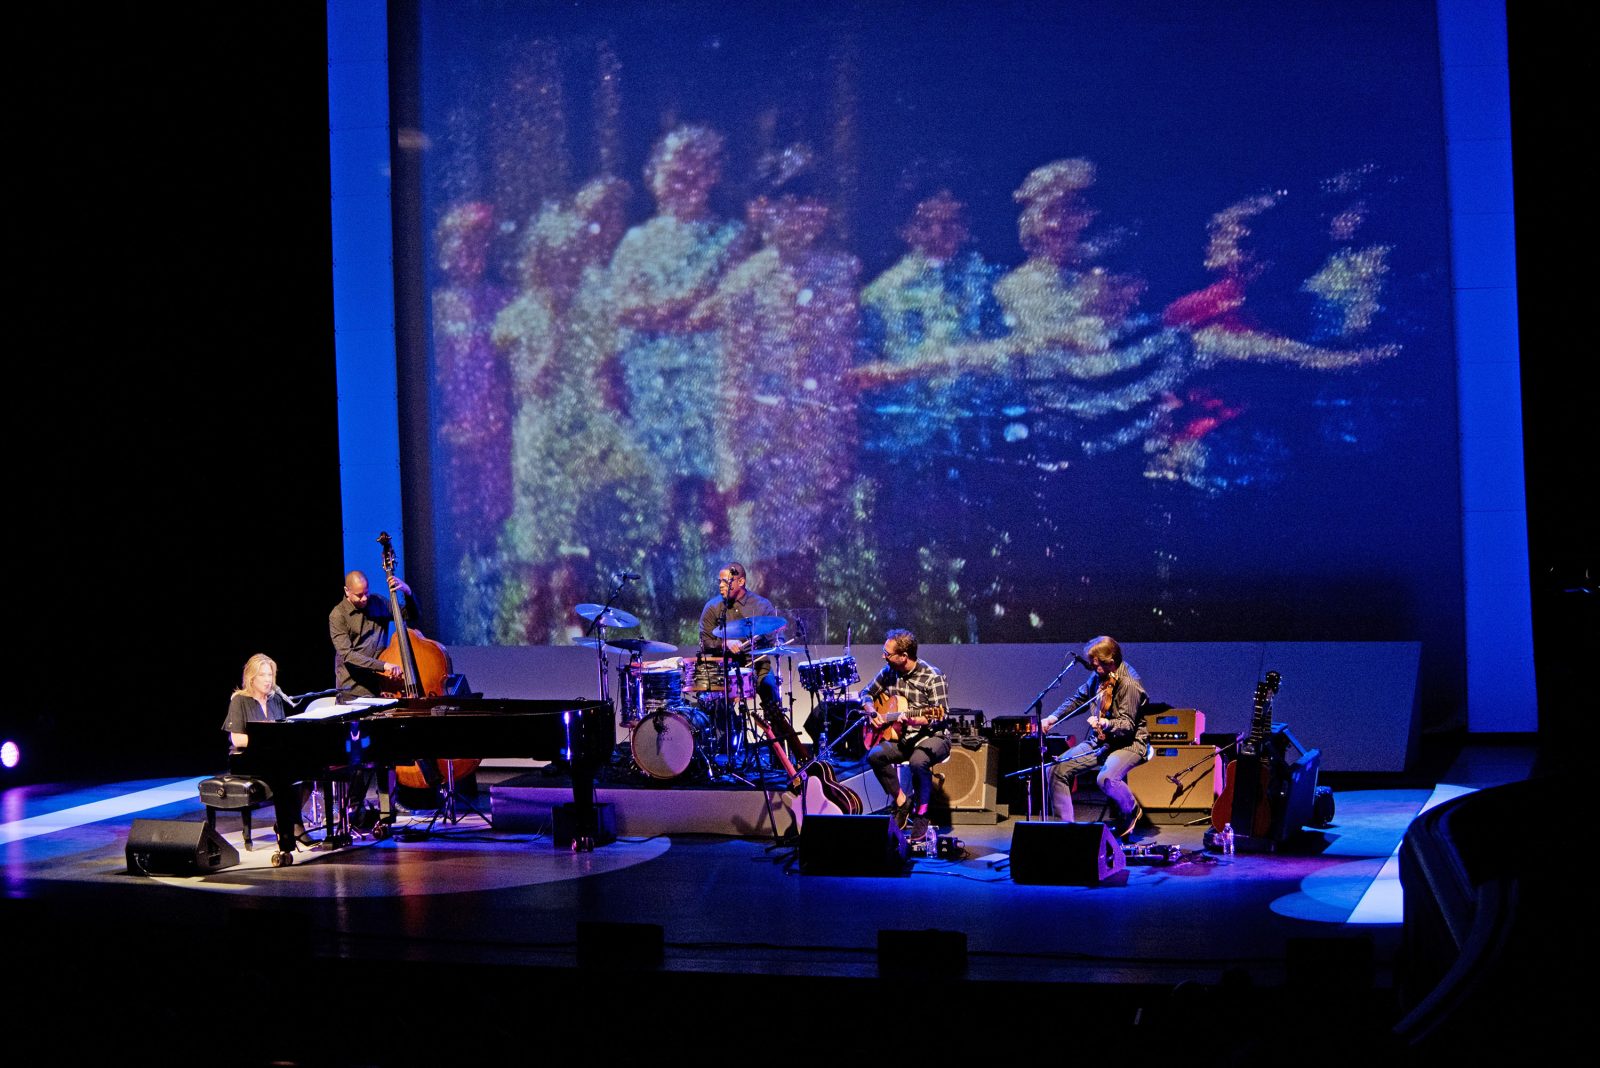 Amy Friend's work featured on Diana Krall's tour